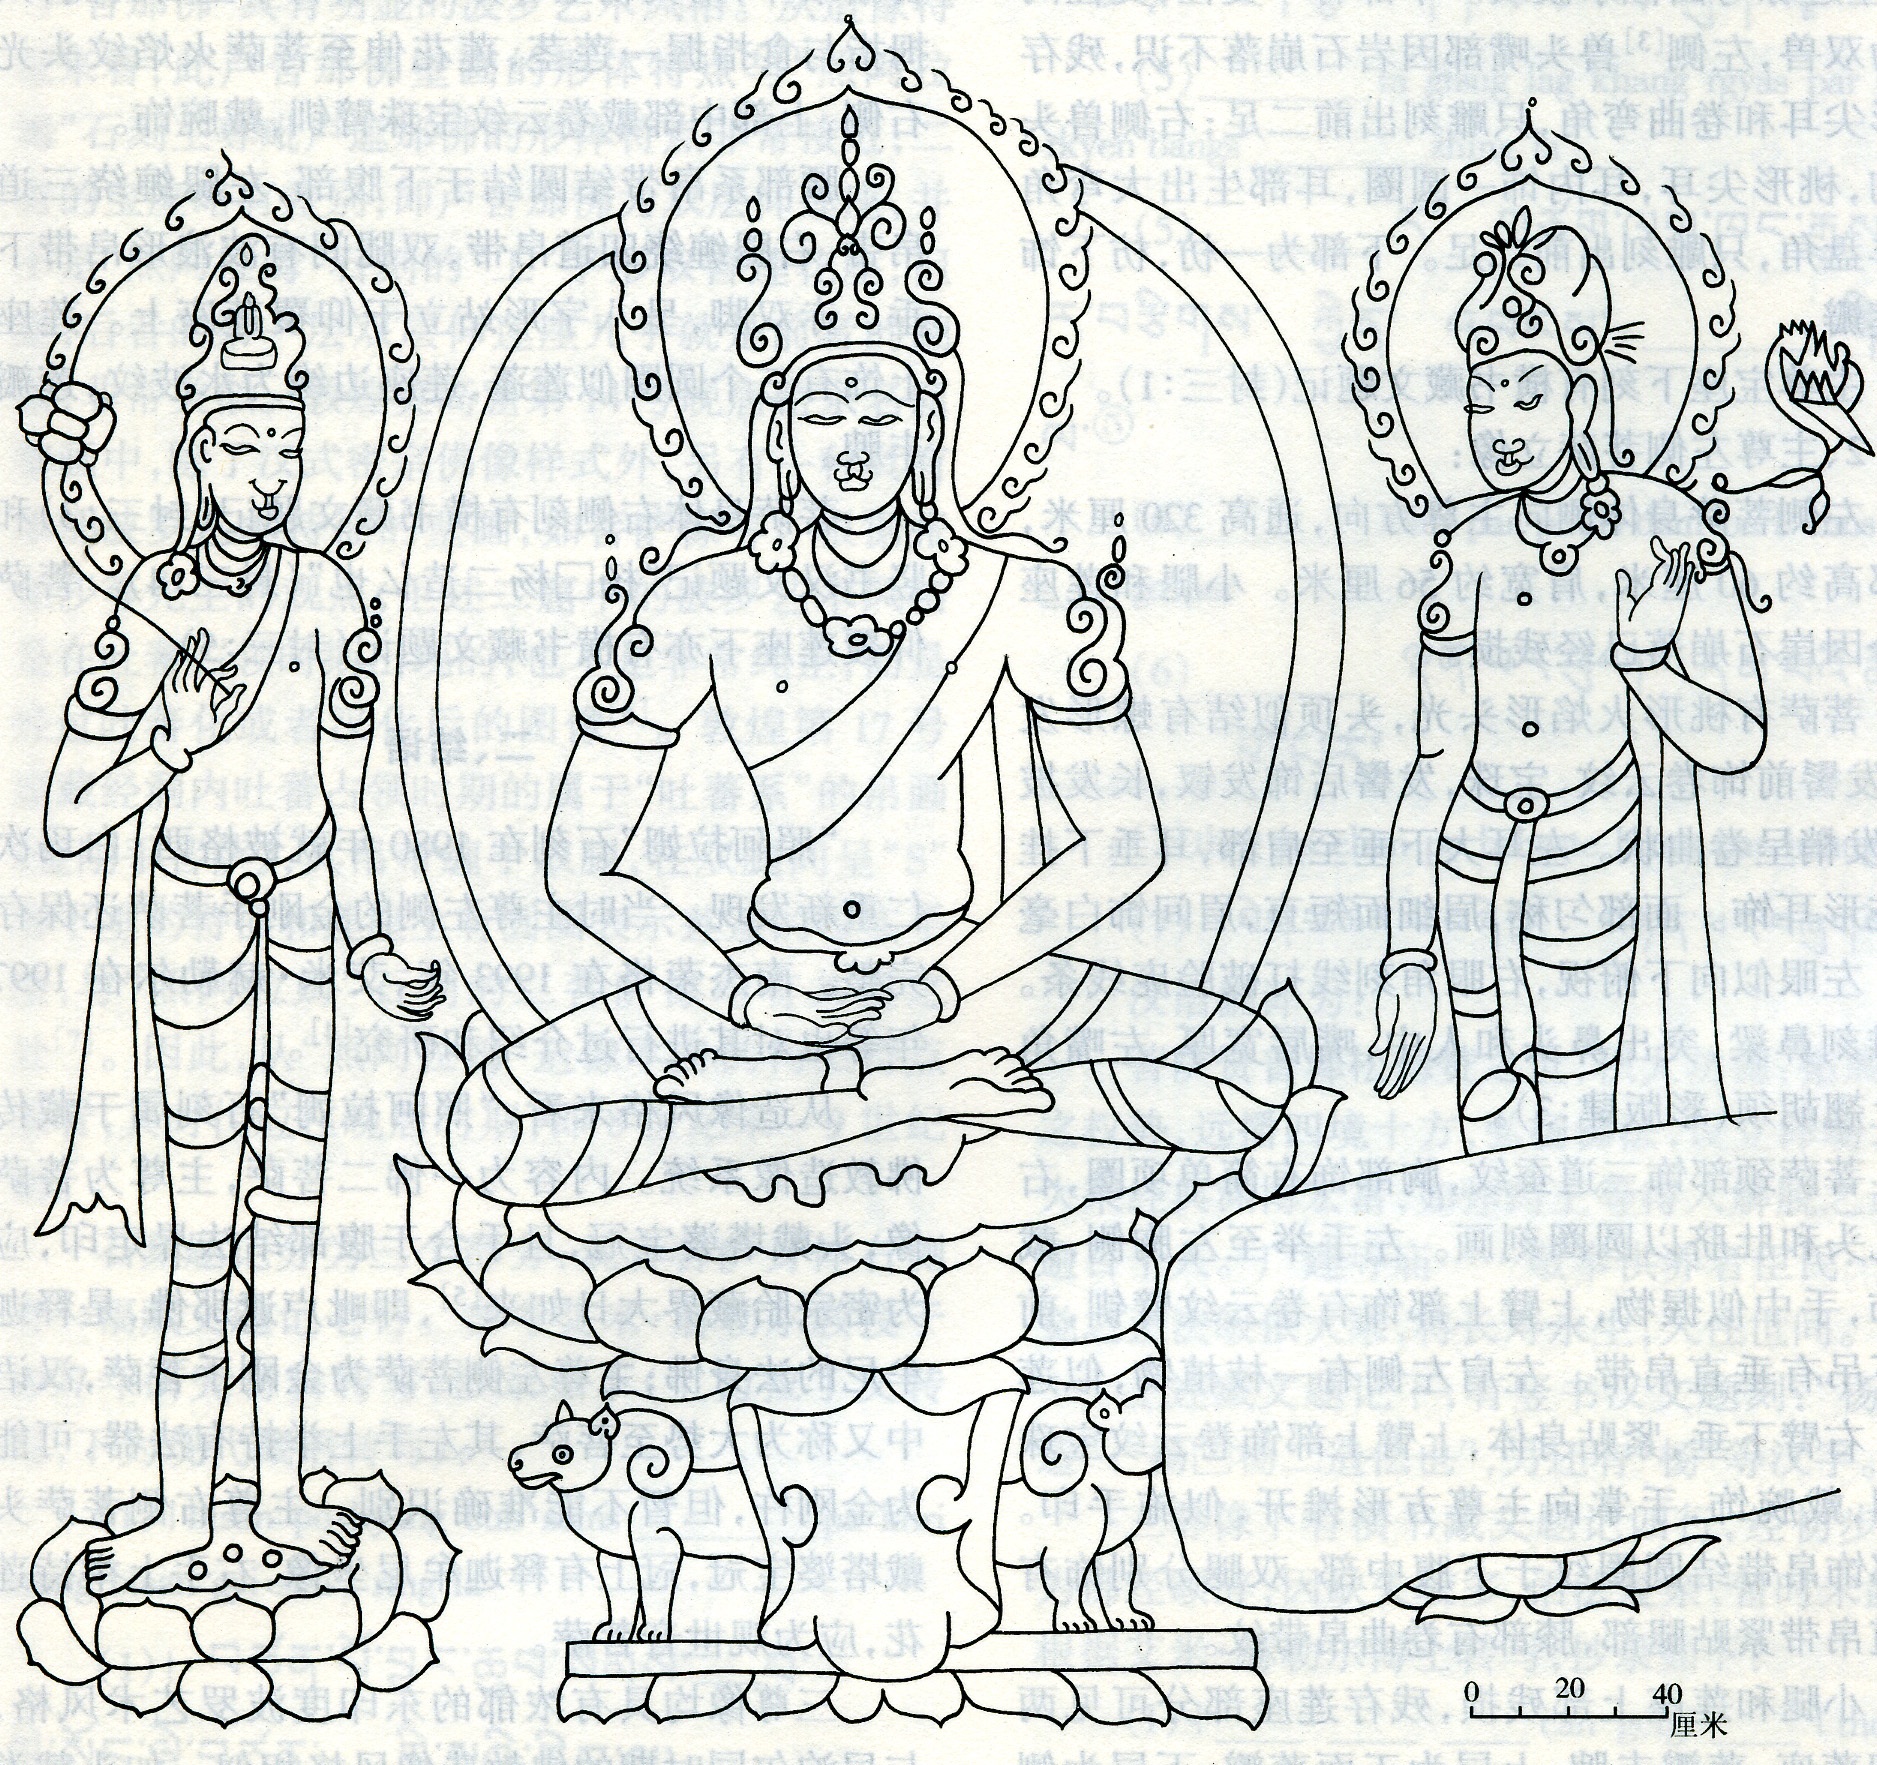 Line drawing of seated Buddha flanked by deities; printed on paper with faint lines of Chinese text